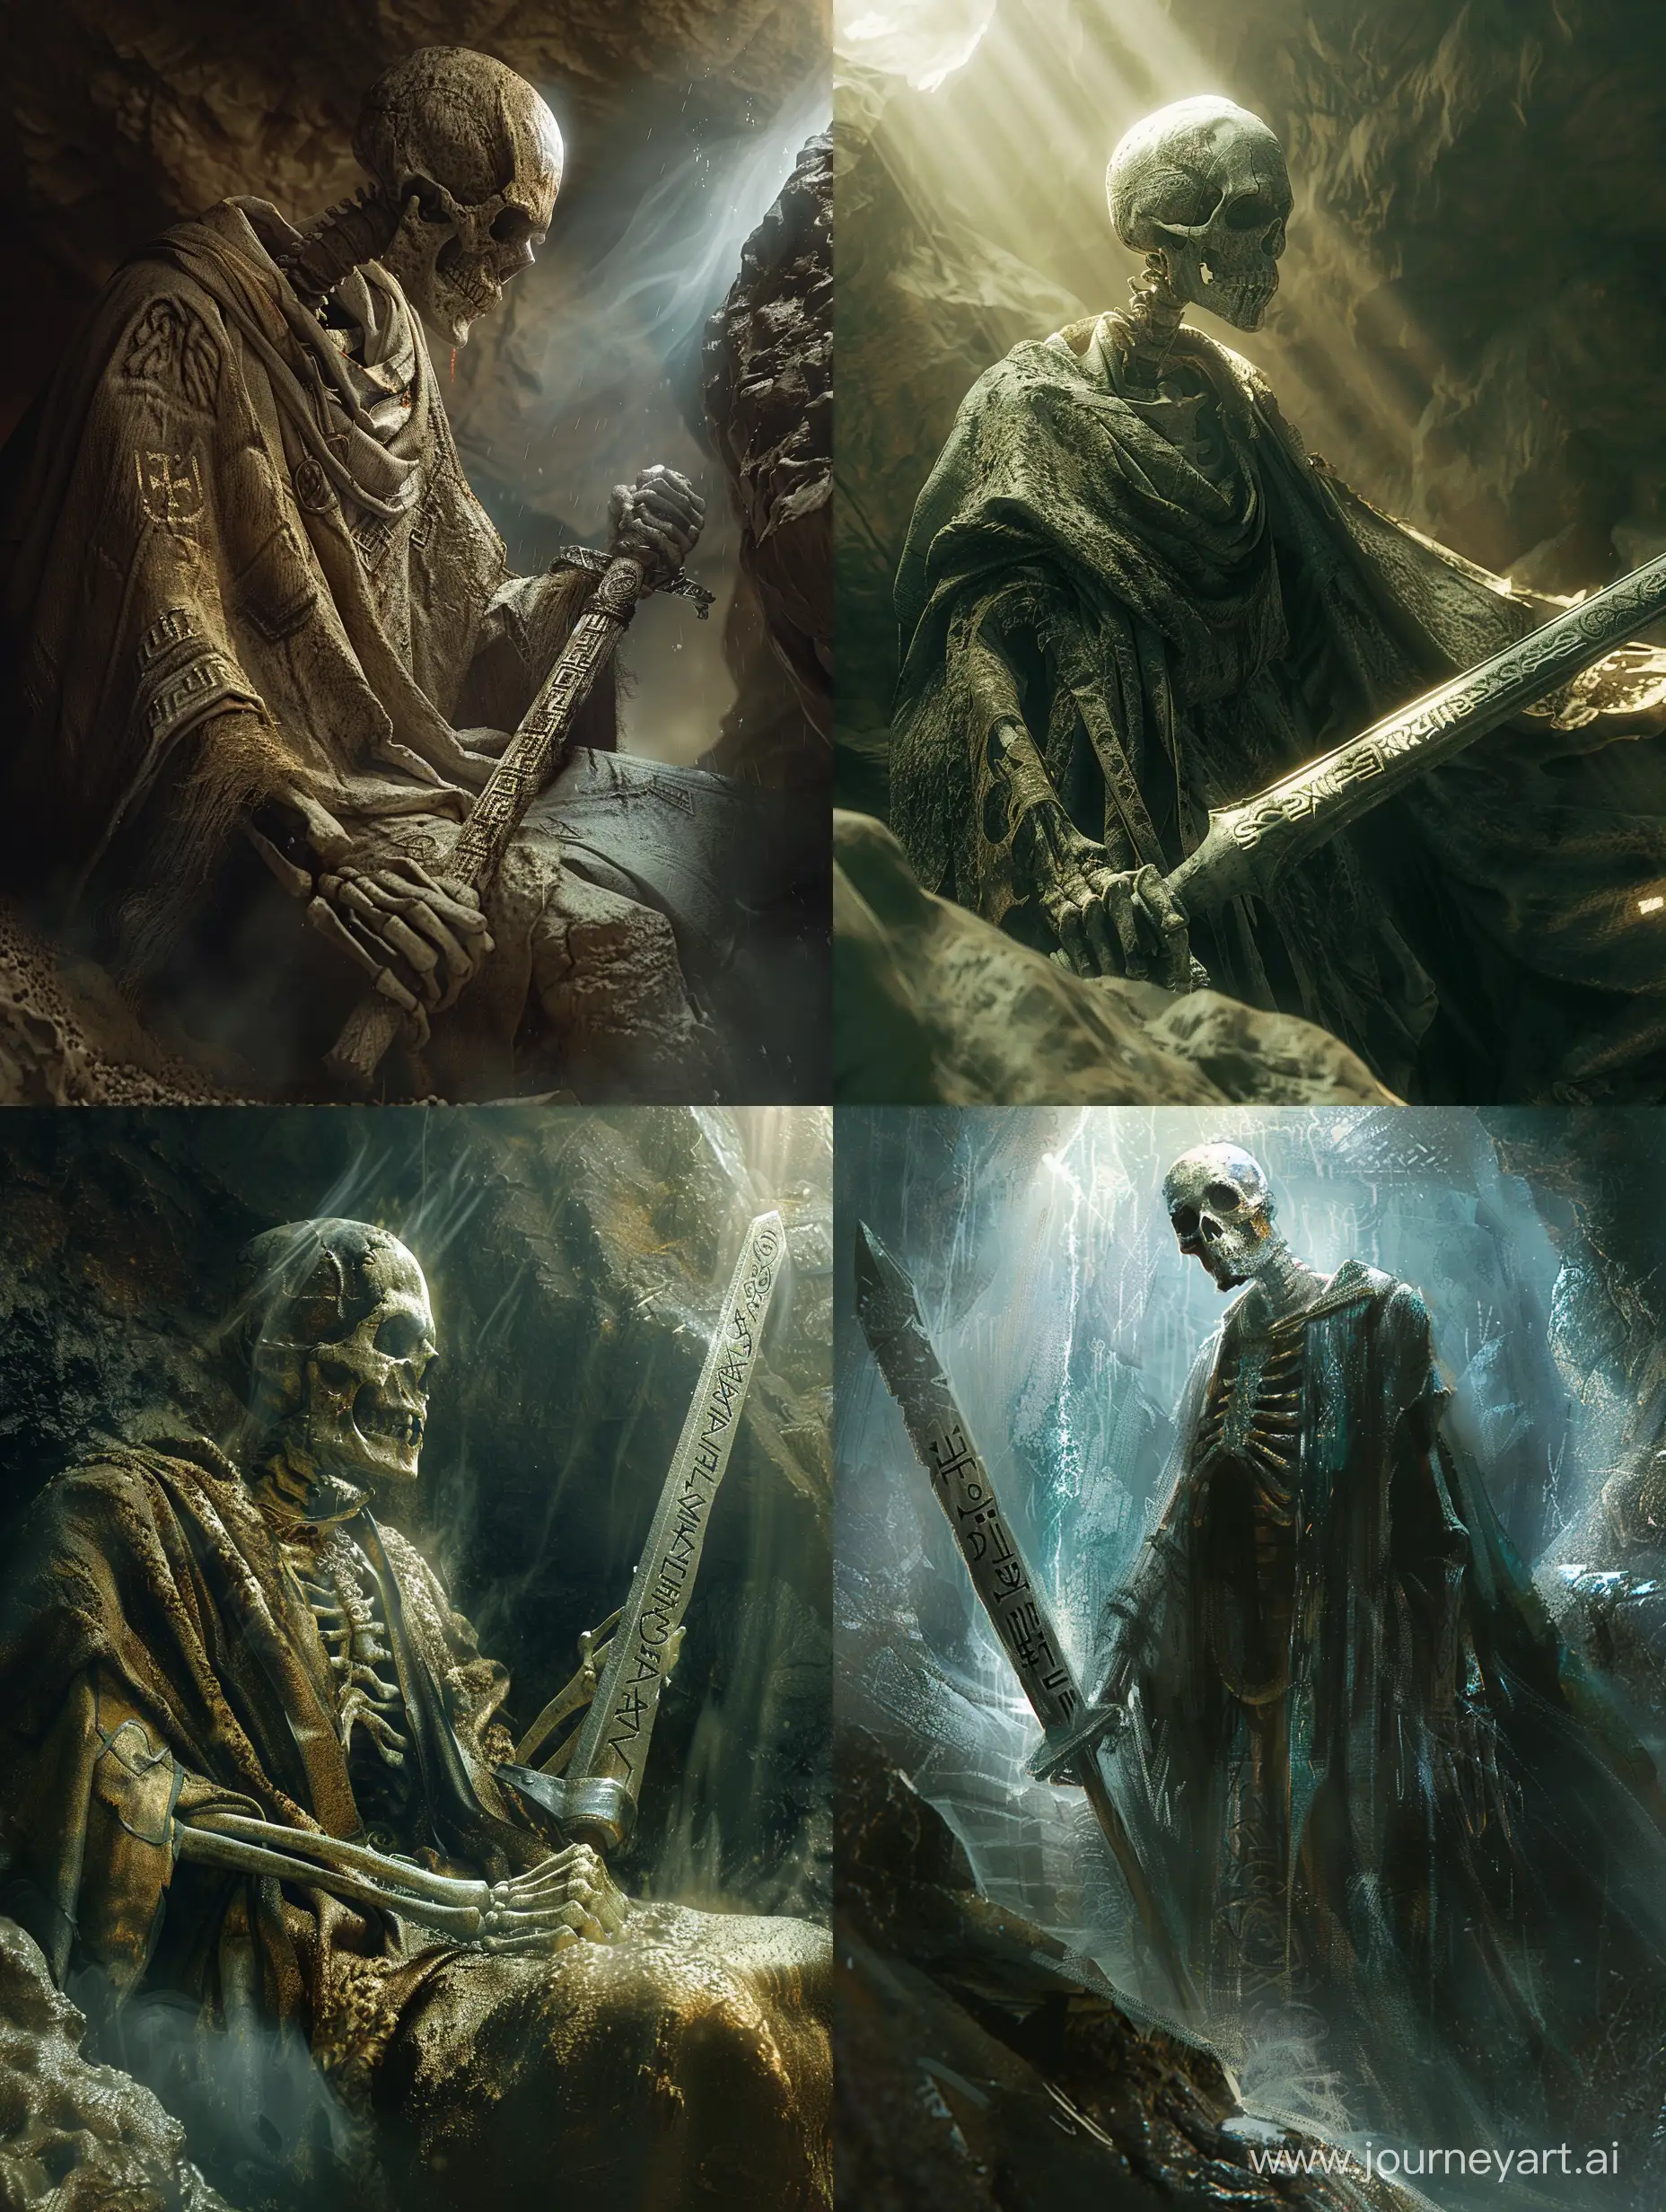 Skeleton warrior with robe,with Stone sword ,in a cave-like place underground,horror place,Dark light,Runic script on his bone,incredible detail,terrifying,Digital Art,Imaginary image,fantasy.